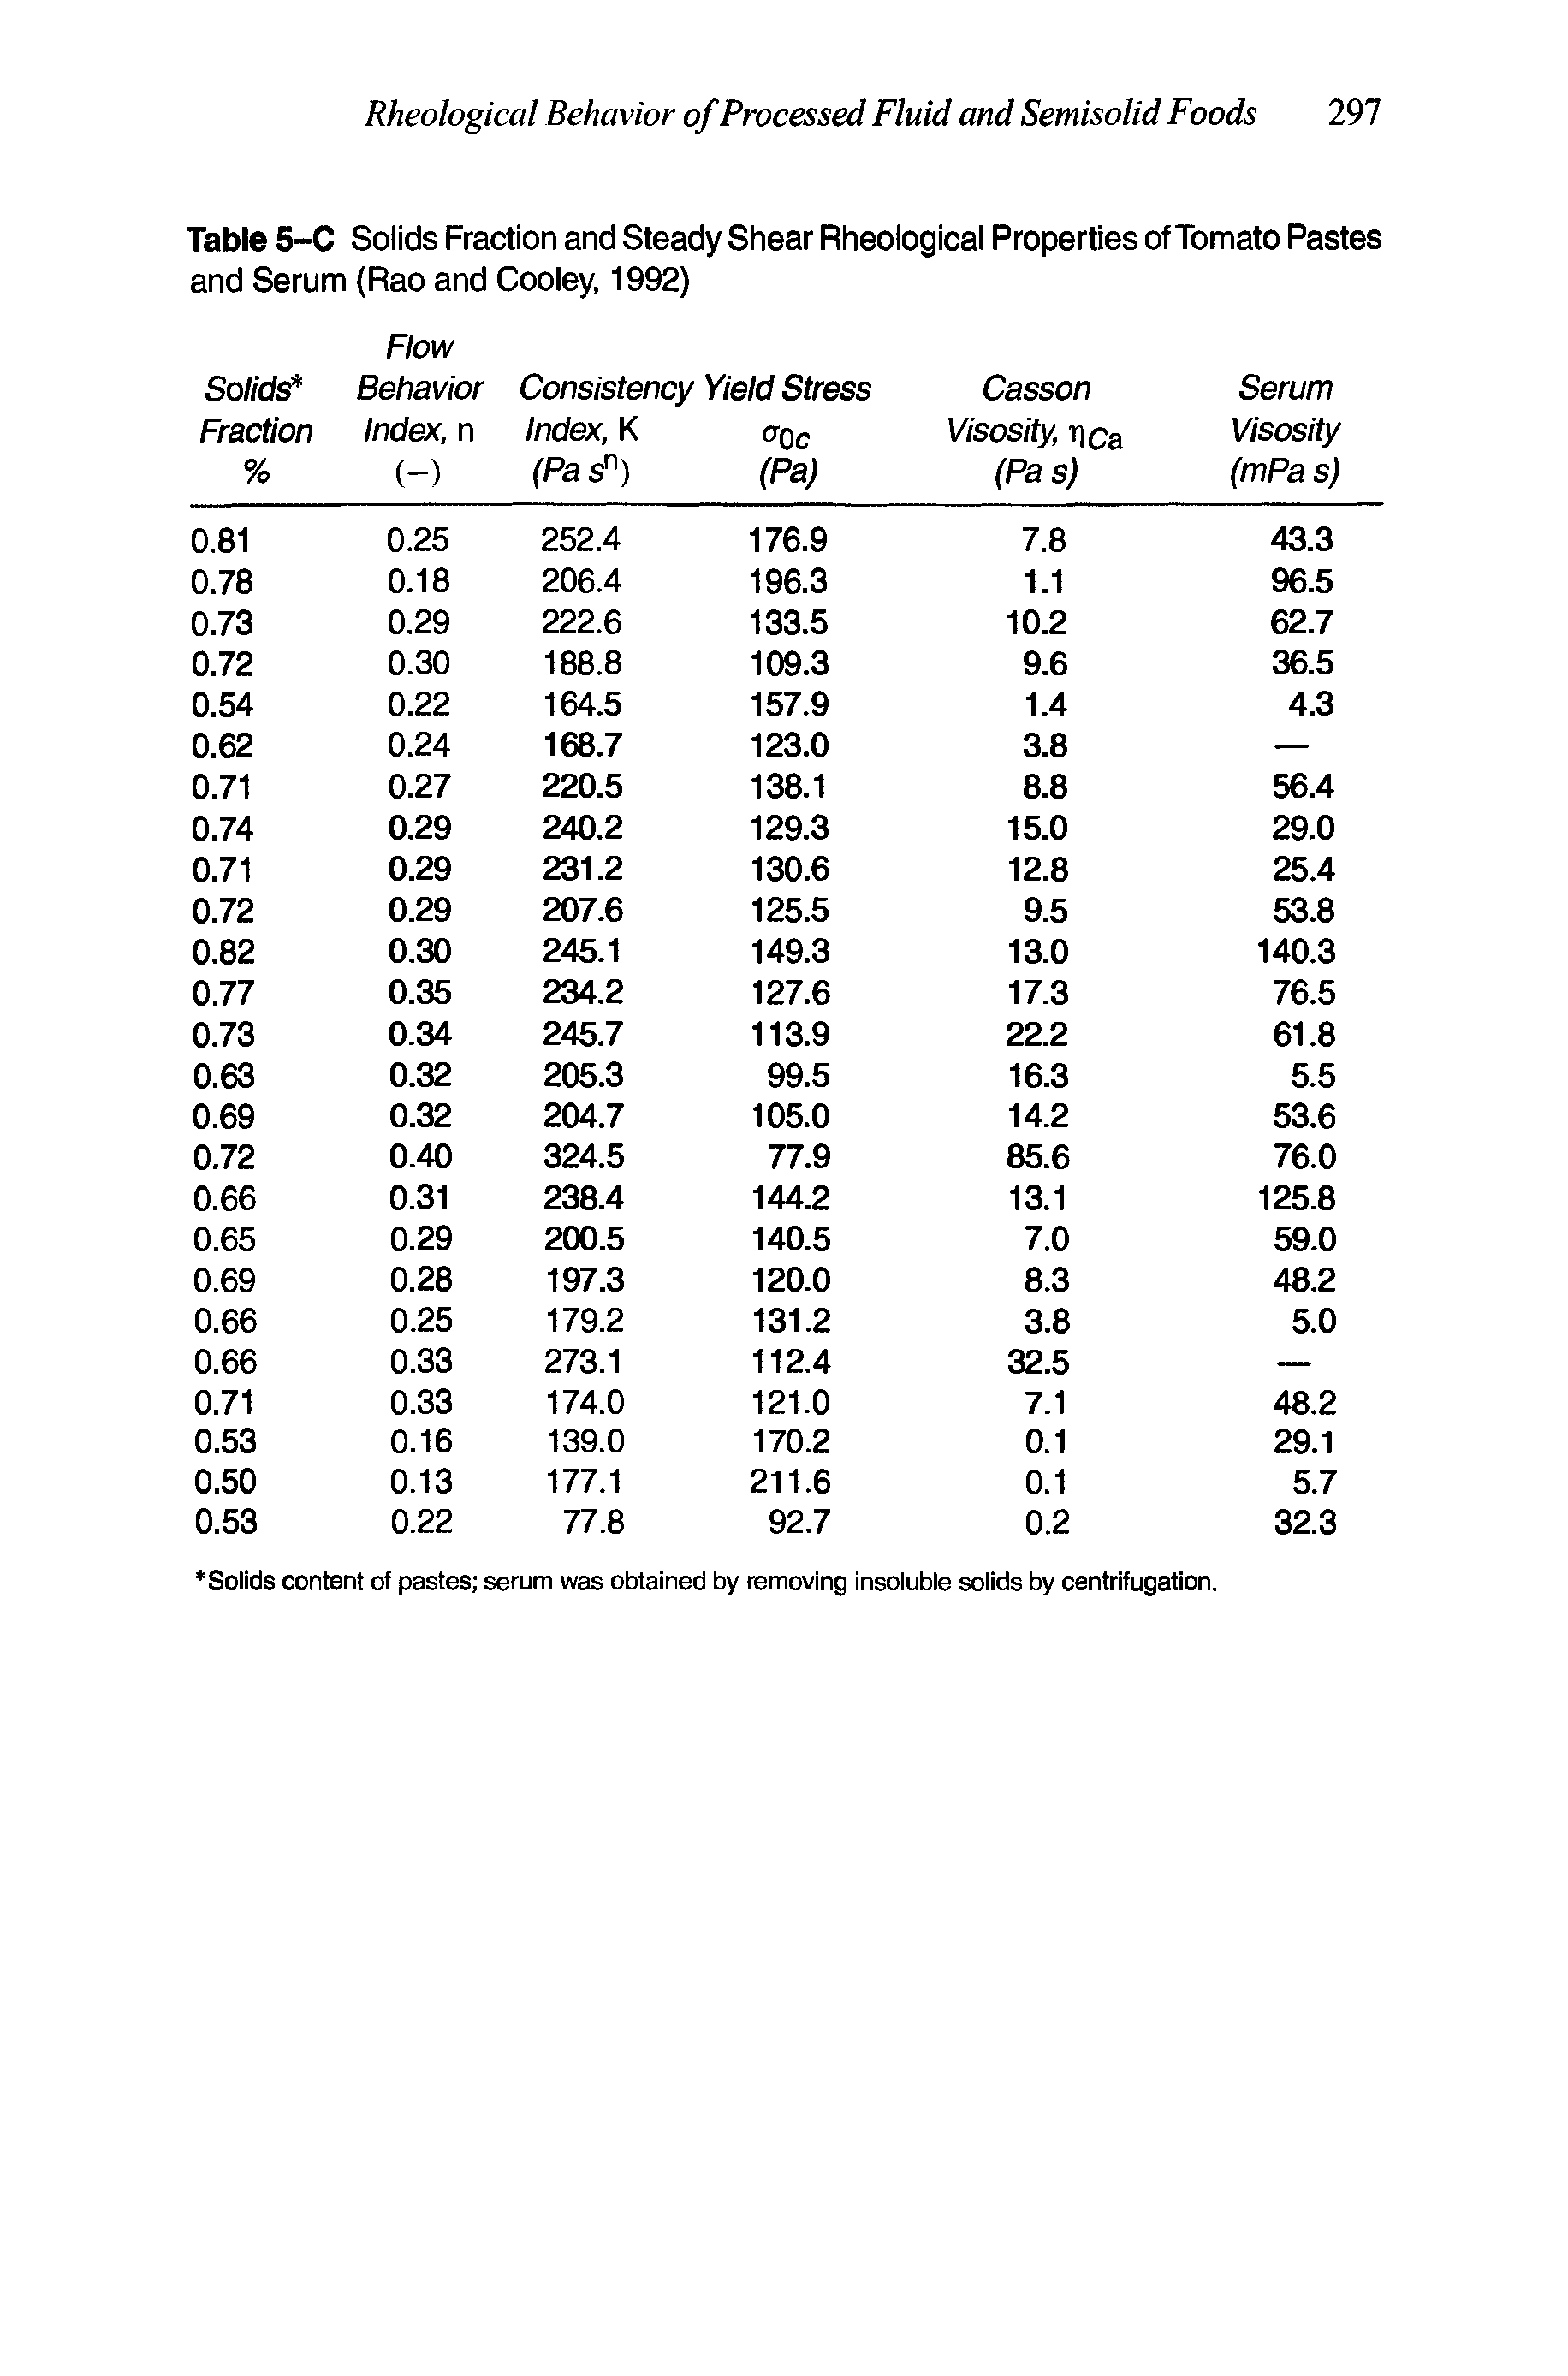 Table 5-C Solids Fraction and Steady Shear Rheological Properties of Tomato Pastes and Serum (Rao and Cooley, 1992)...